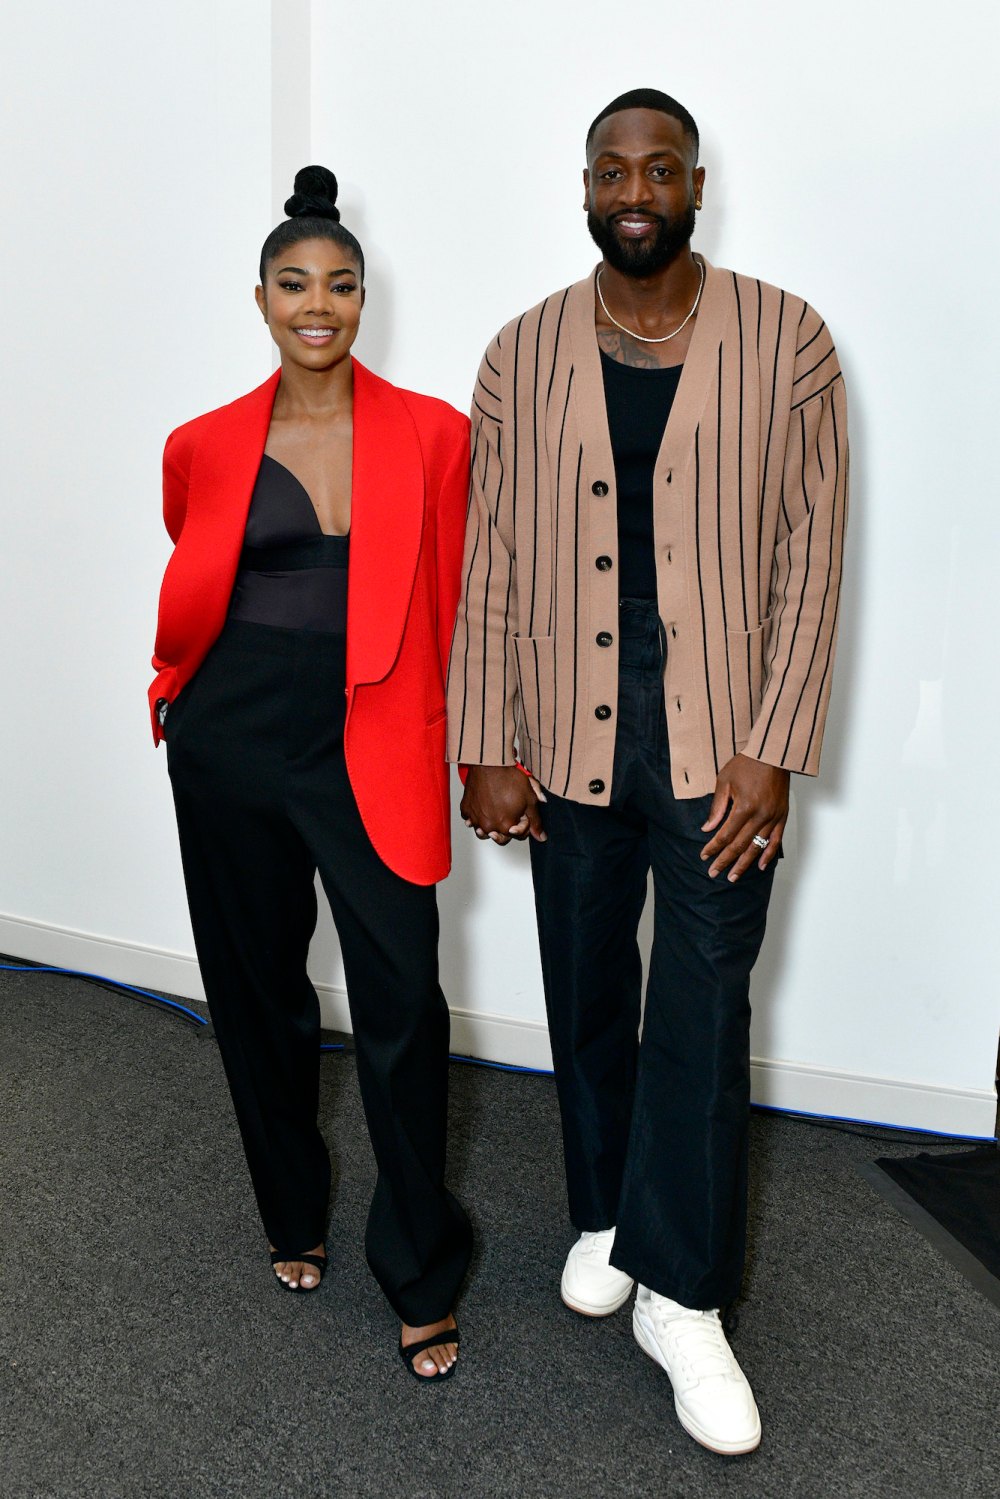 Gabrielle Union and Dwyane Wade Turn Up the Heat in Contrasting Outfits on Date Night in NYC